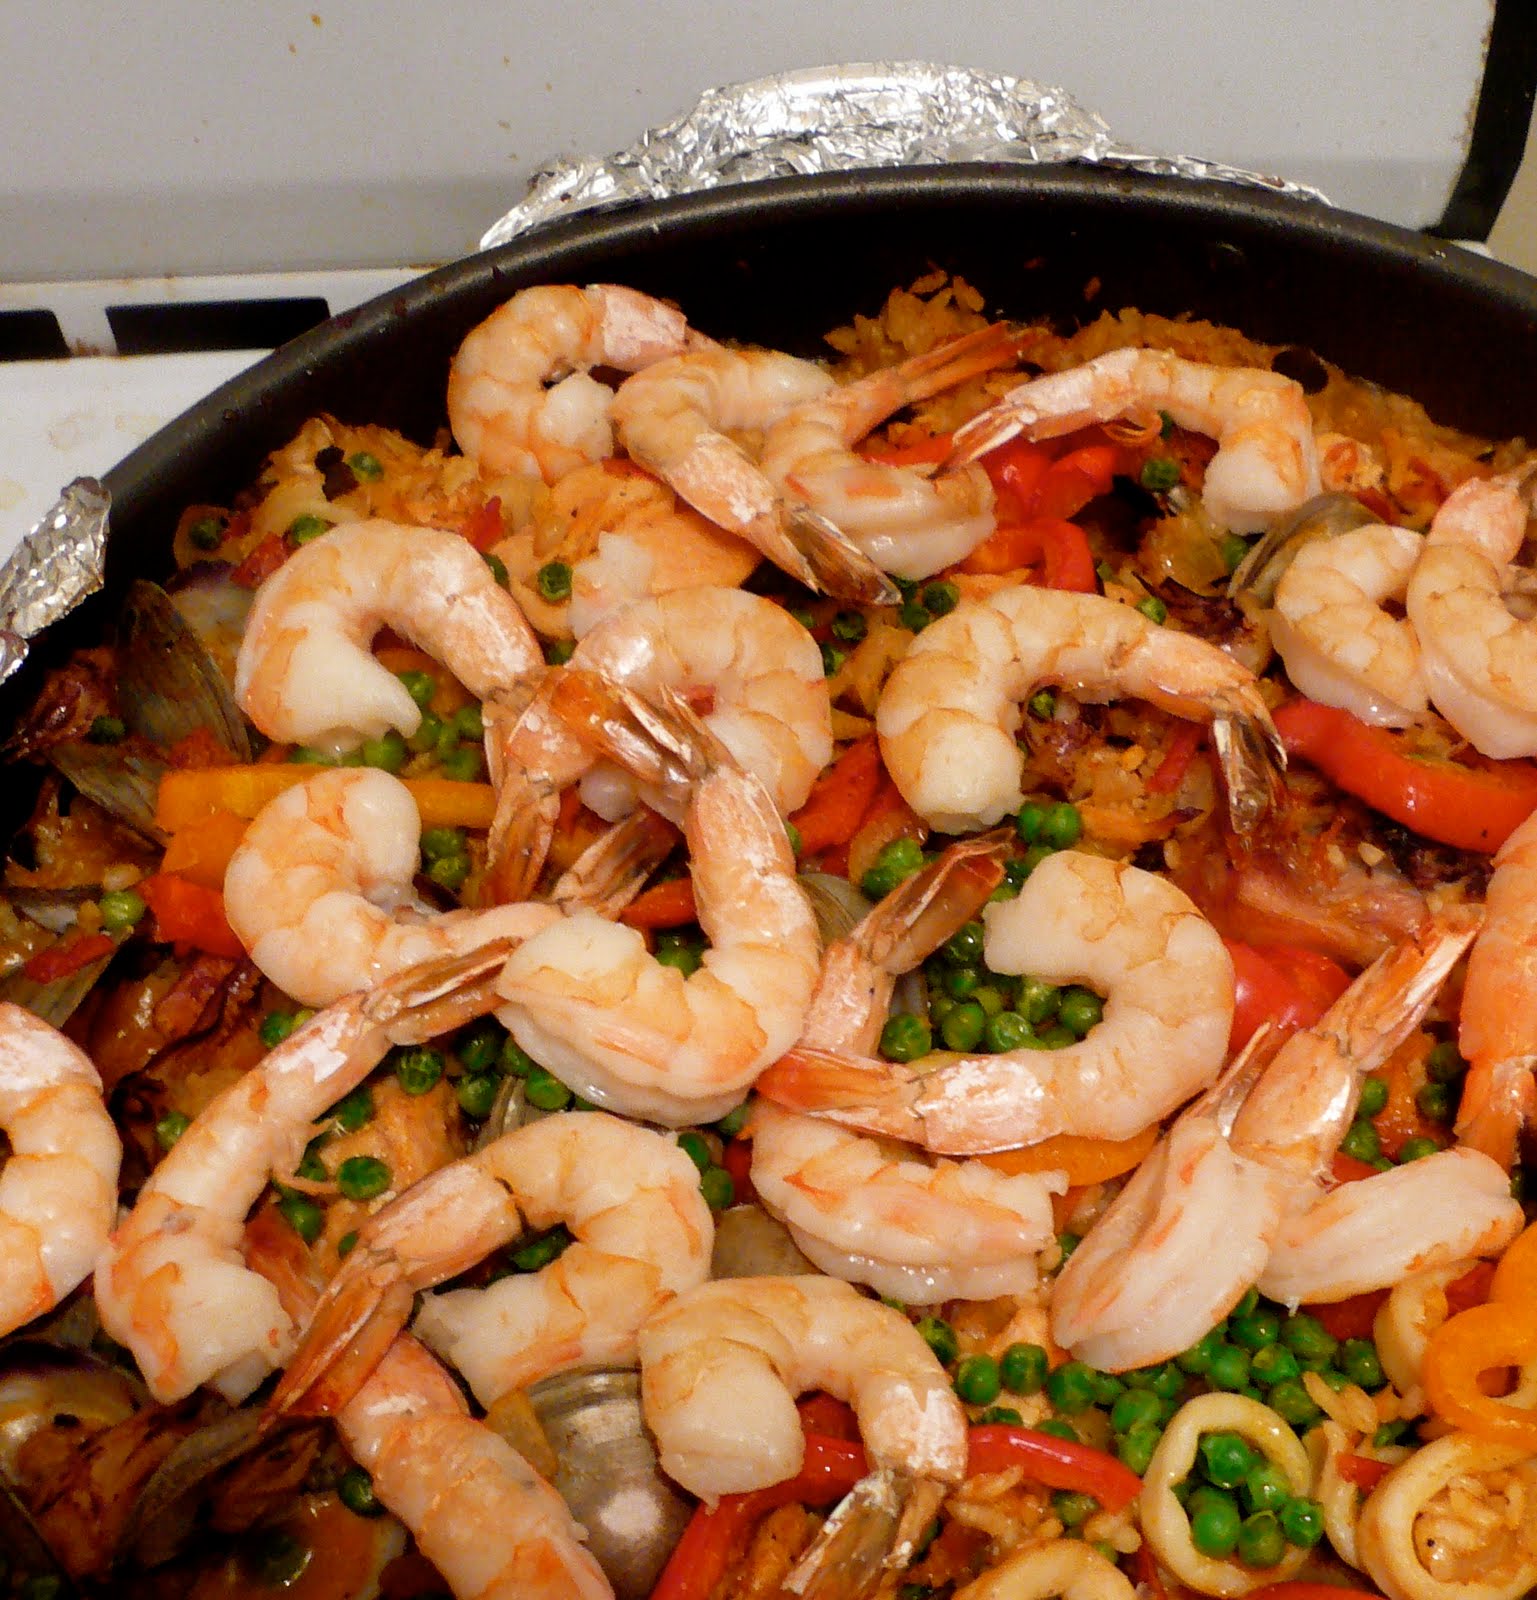 Bacon Concentrate: Seafood Paella (or Paella Valenciana), on the Grill!